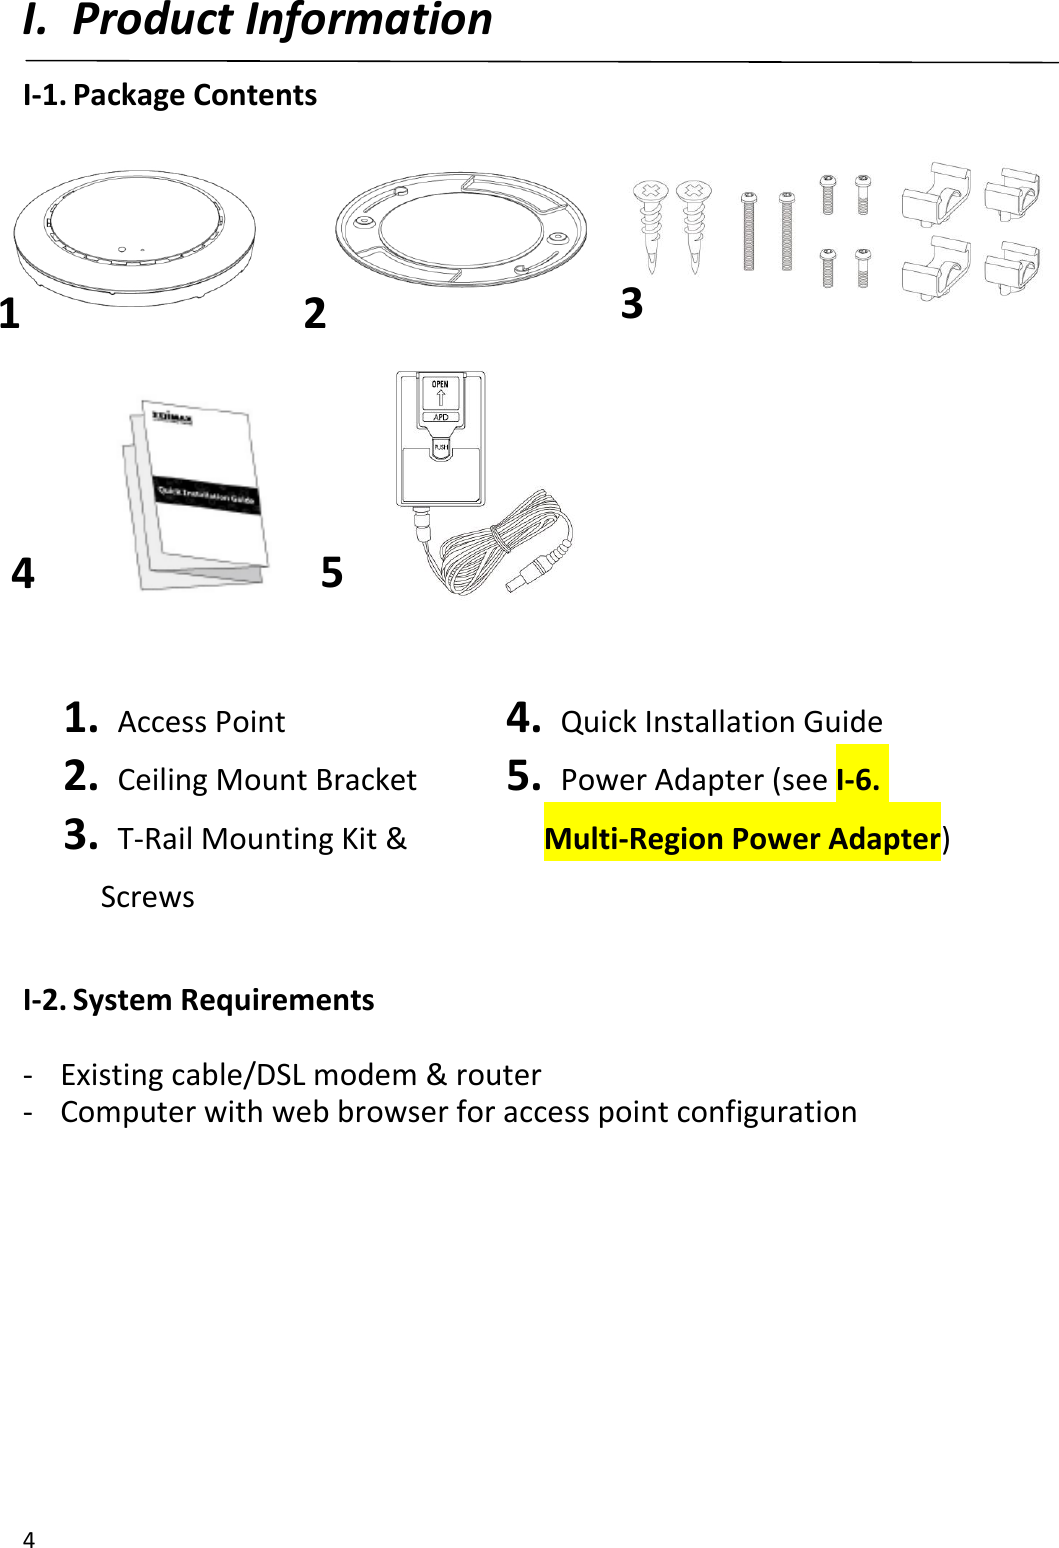 4  I. Product Information I-1. Package Contents           1.   Access Point 2.   Ceiling Mount Bracket 3.   T-Rail Mounting Kit &amp;   Screws 4.   Quick Installation Guide 5.   Power Adapter (see I-6. Multi-Region Power Adapter)     I-2. System Requirements  - Existing cable/DSL modem &amp; router - Computer with web browser for access point configuration  1 2 3 4 5 